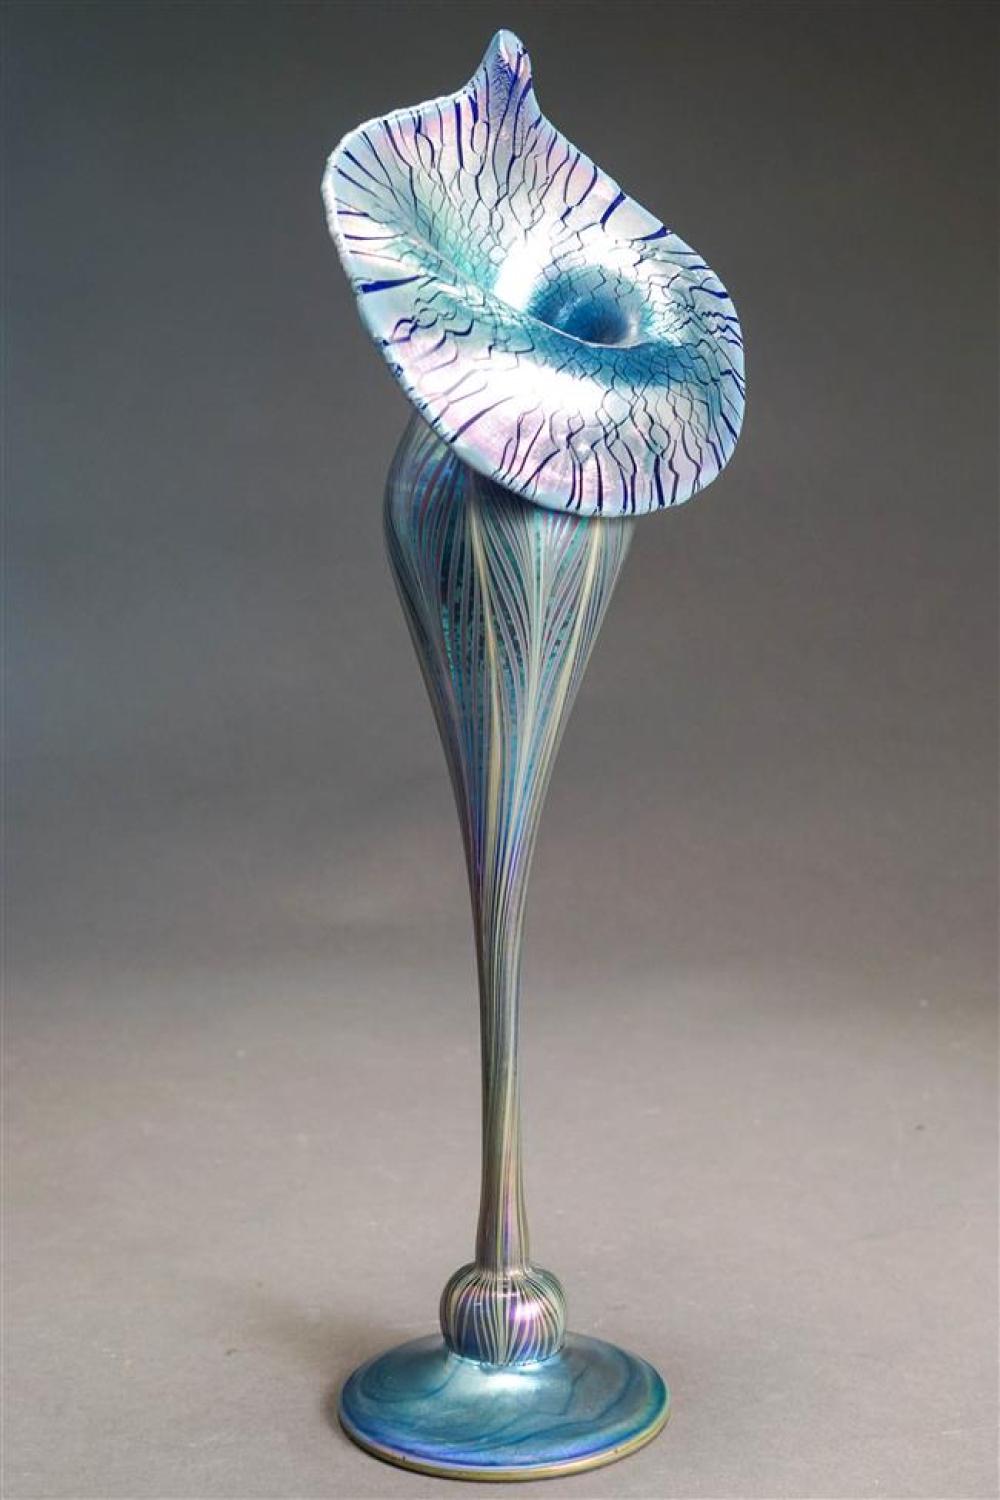 ART GLASS 'JACK IN THE PULPIT'